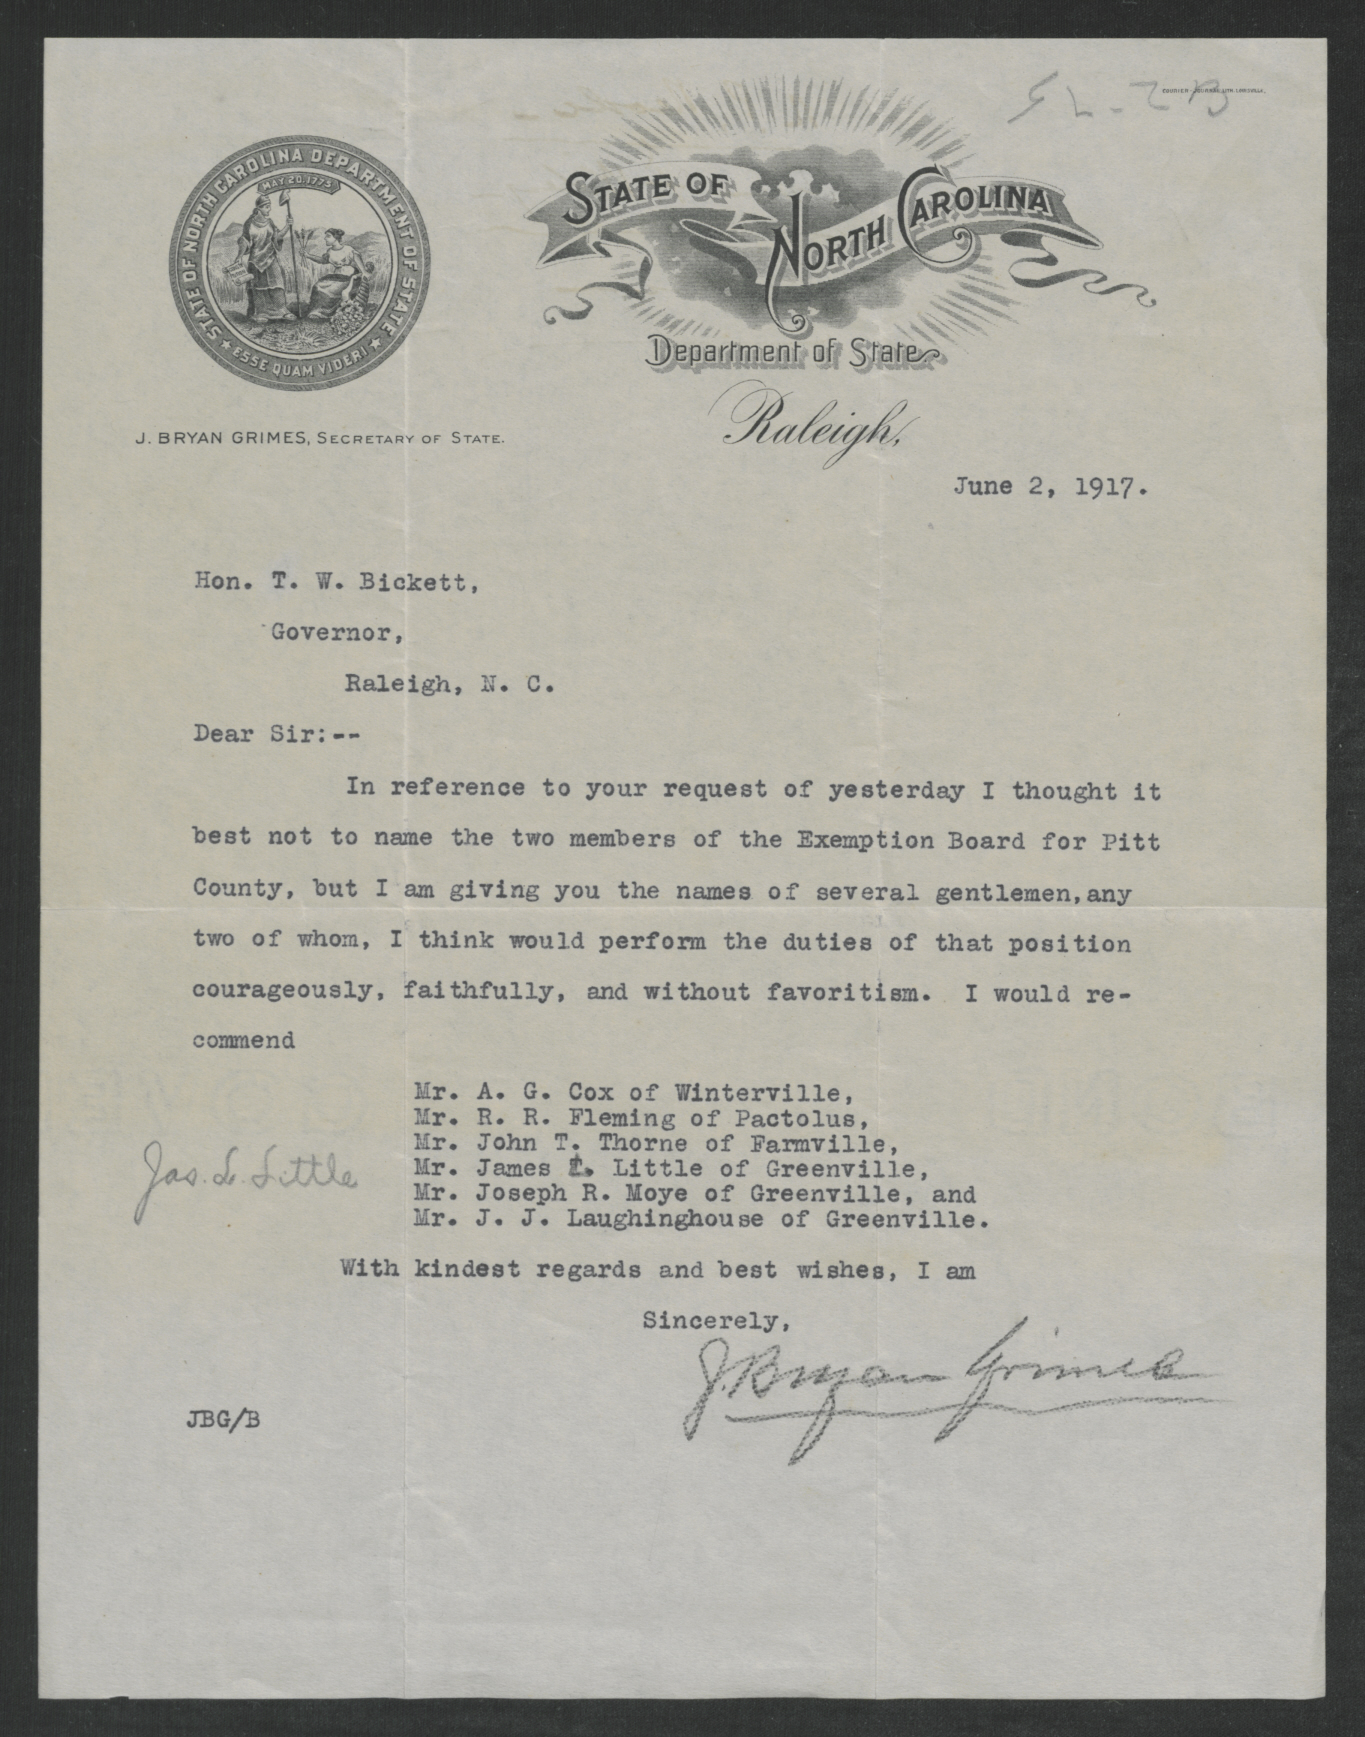 Letter from J. Bryan Grimes to Thomas W. Bickett, June 2, 1917